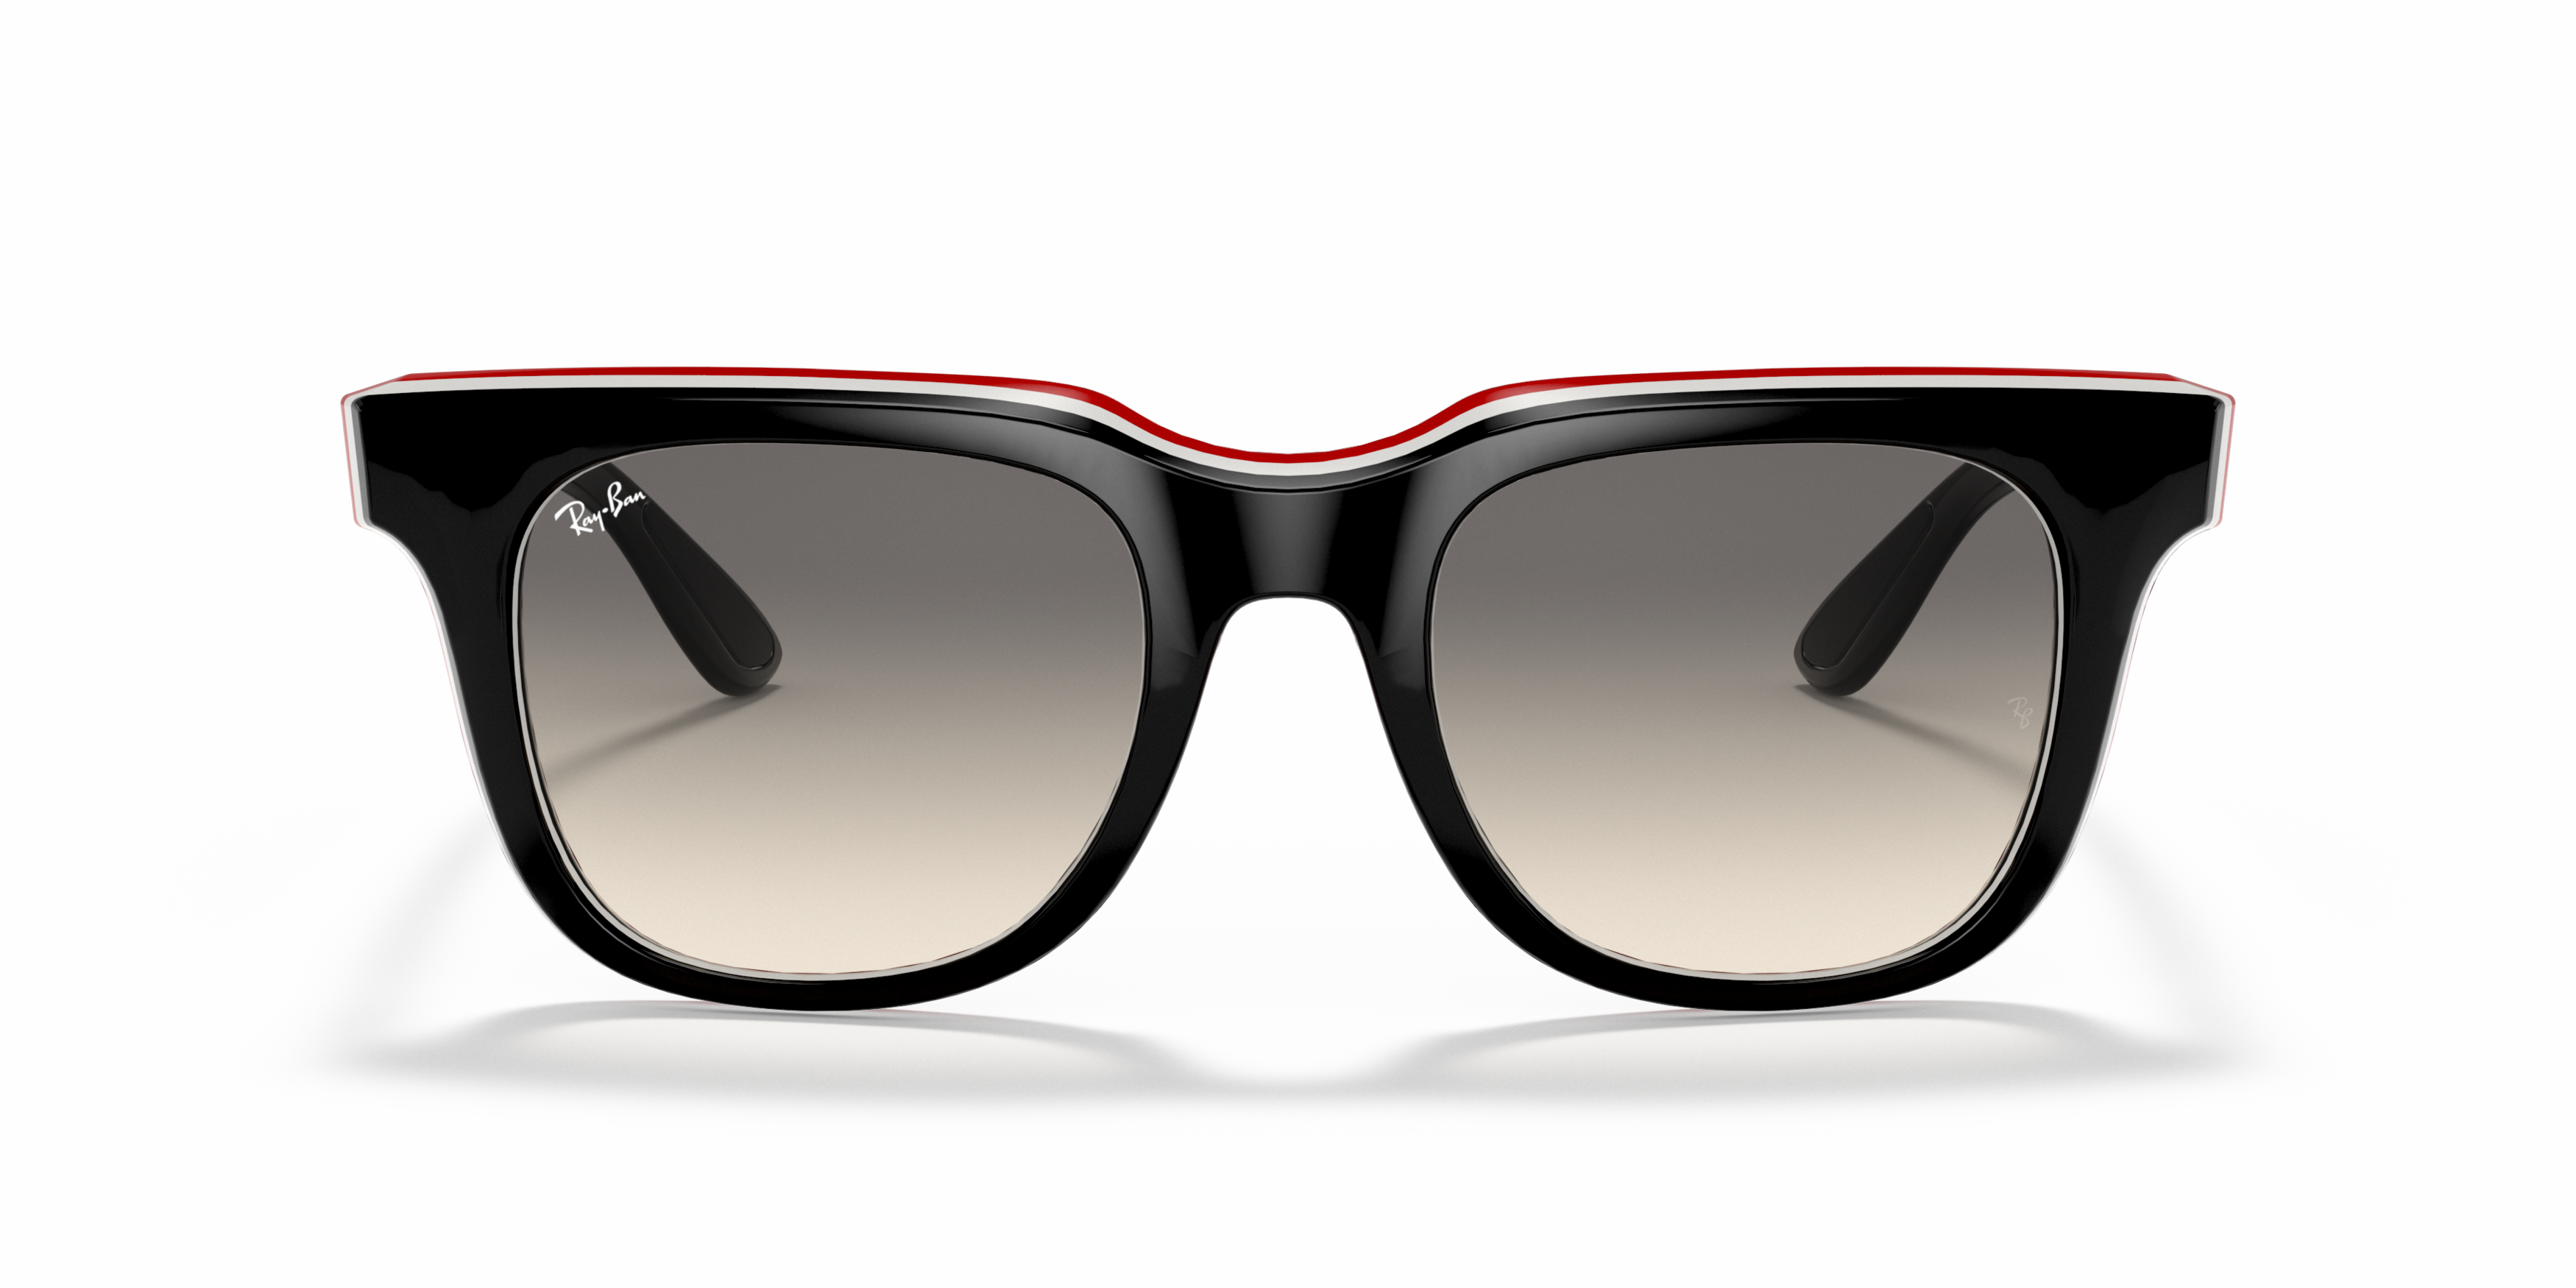 [products.image.front] Ray-Ban RB4368 651811